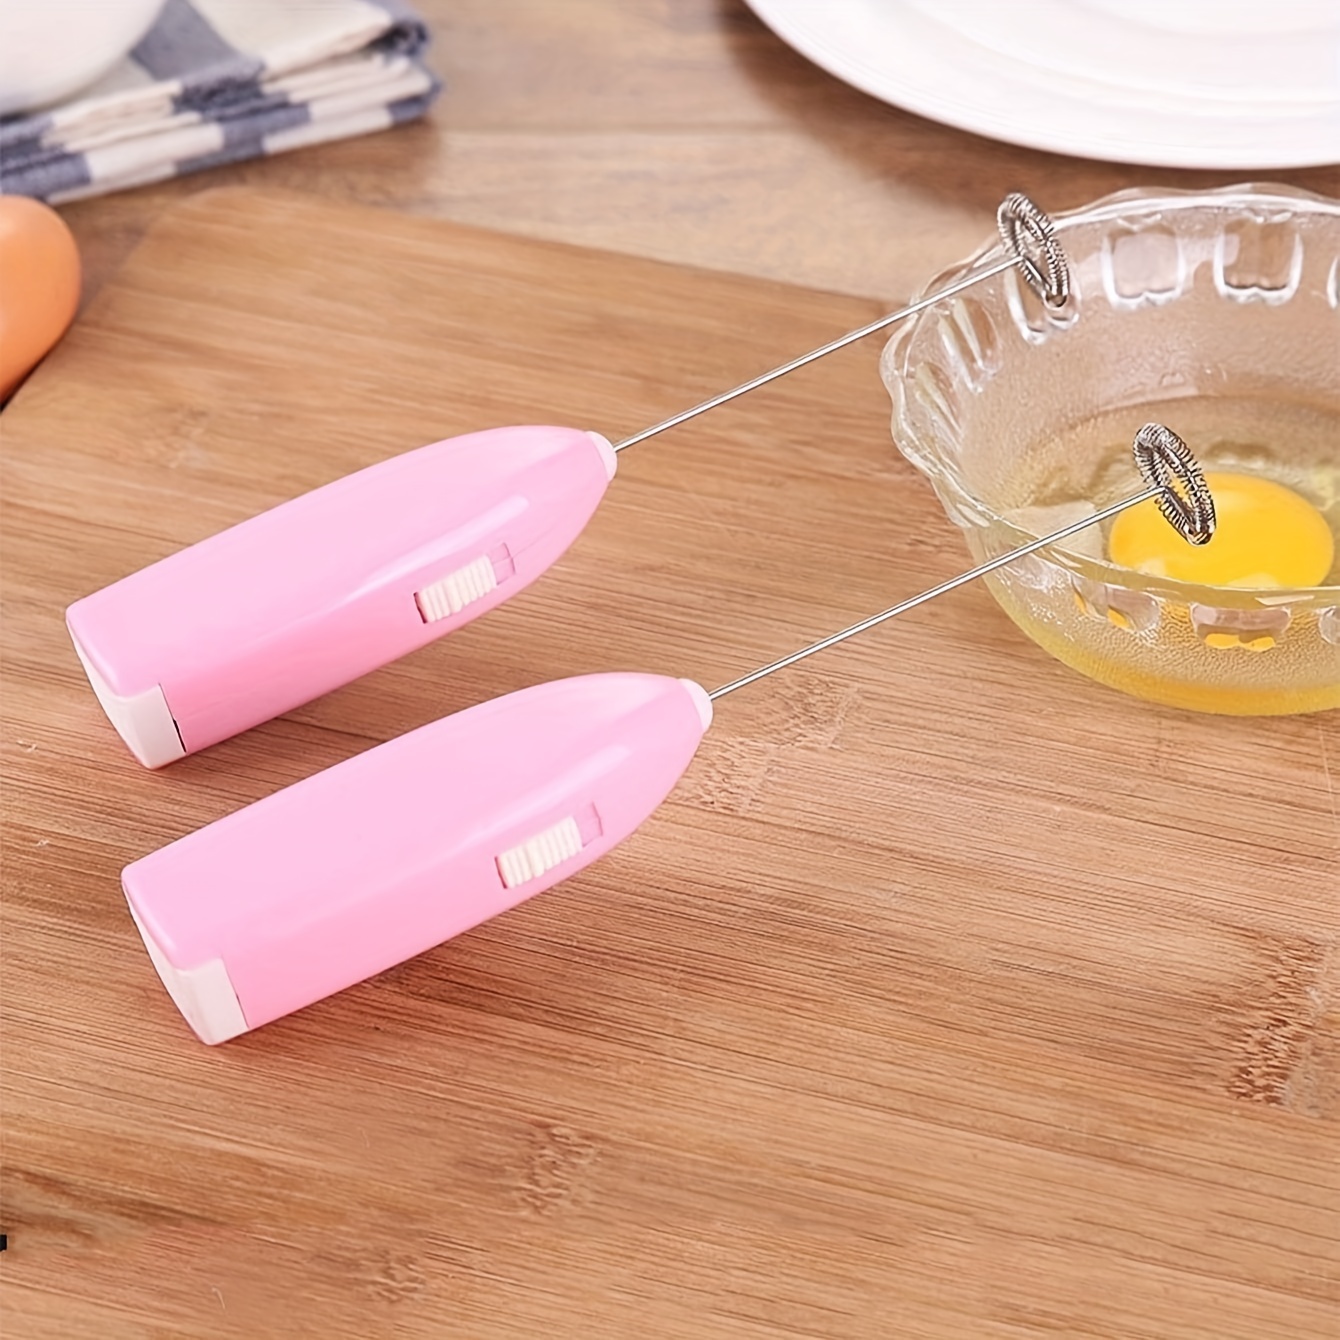 Kitchen Egg Beater Coffee Milk Drink Electric Whisk Mixer Frother Foamer Electric Mini Handle Mixer Stirrer Kitchen Tools, Pink